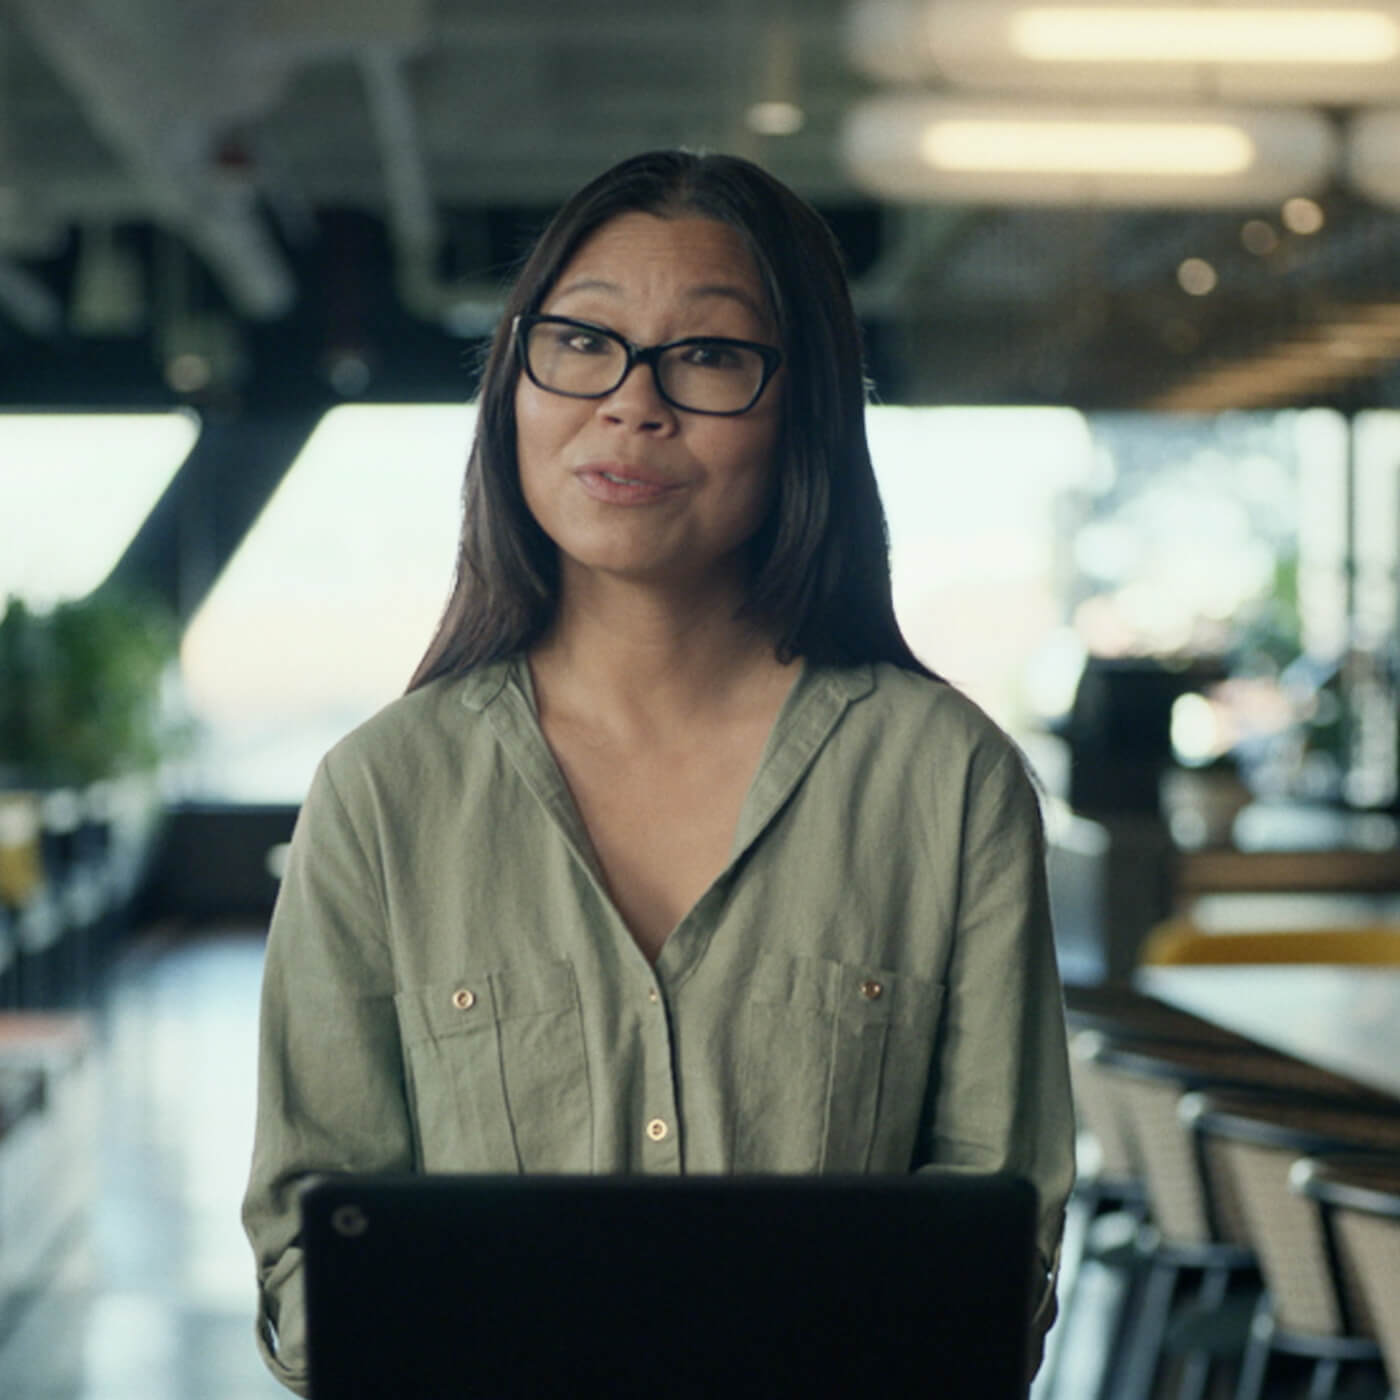 Image: a person with glasses sitting in front of a computer speaking.